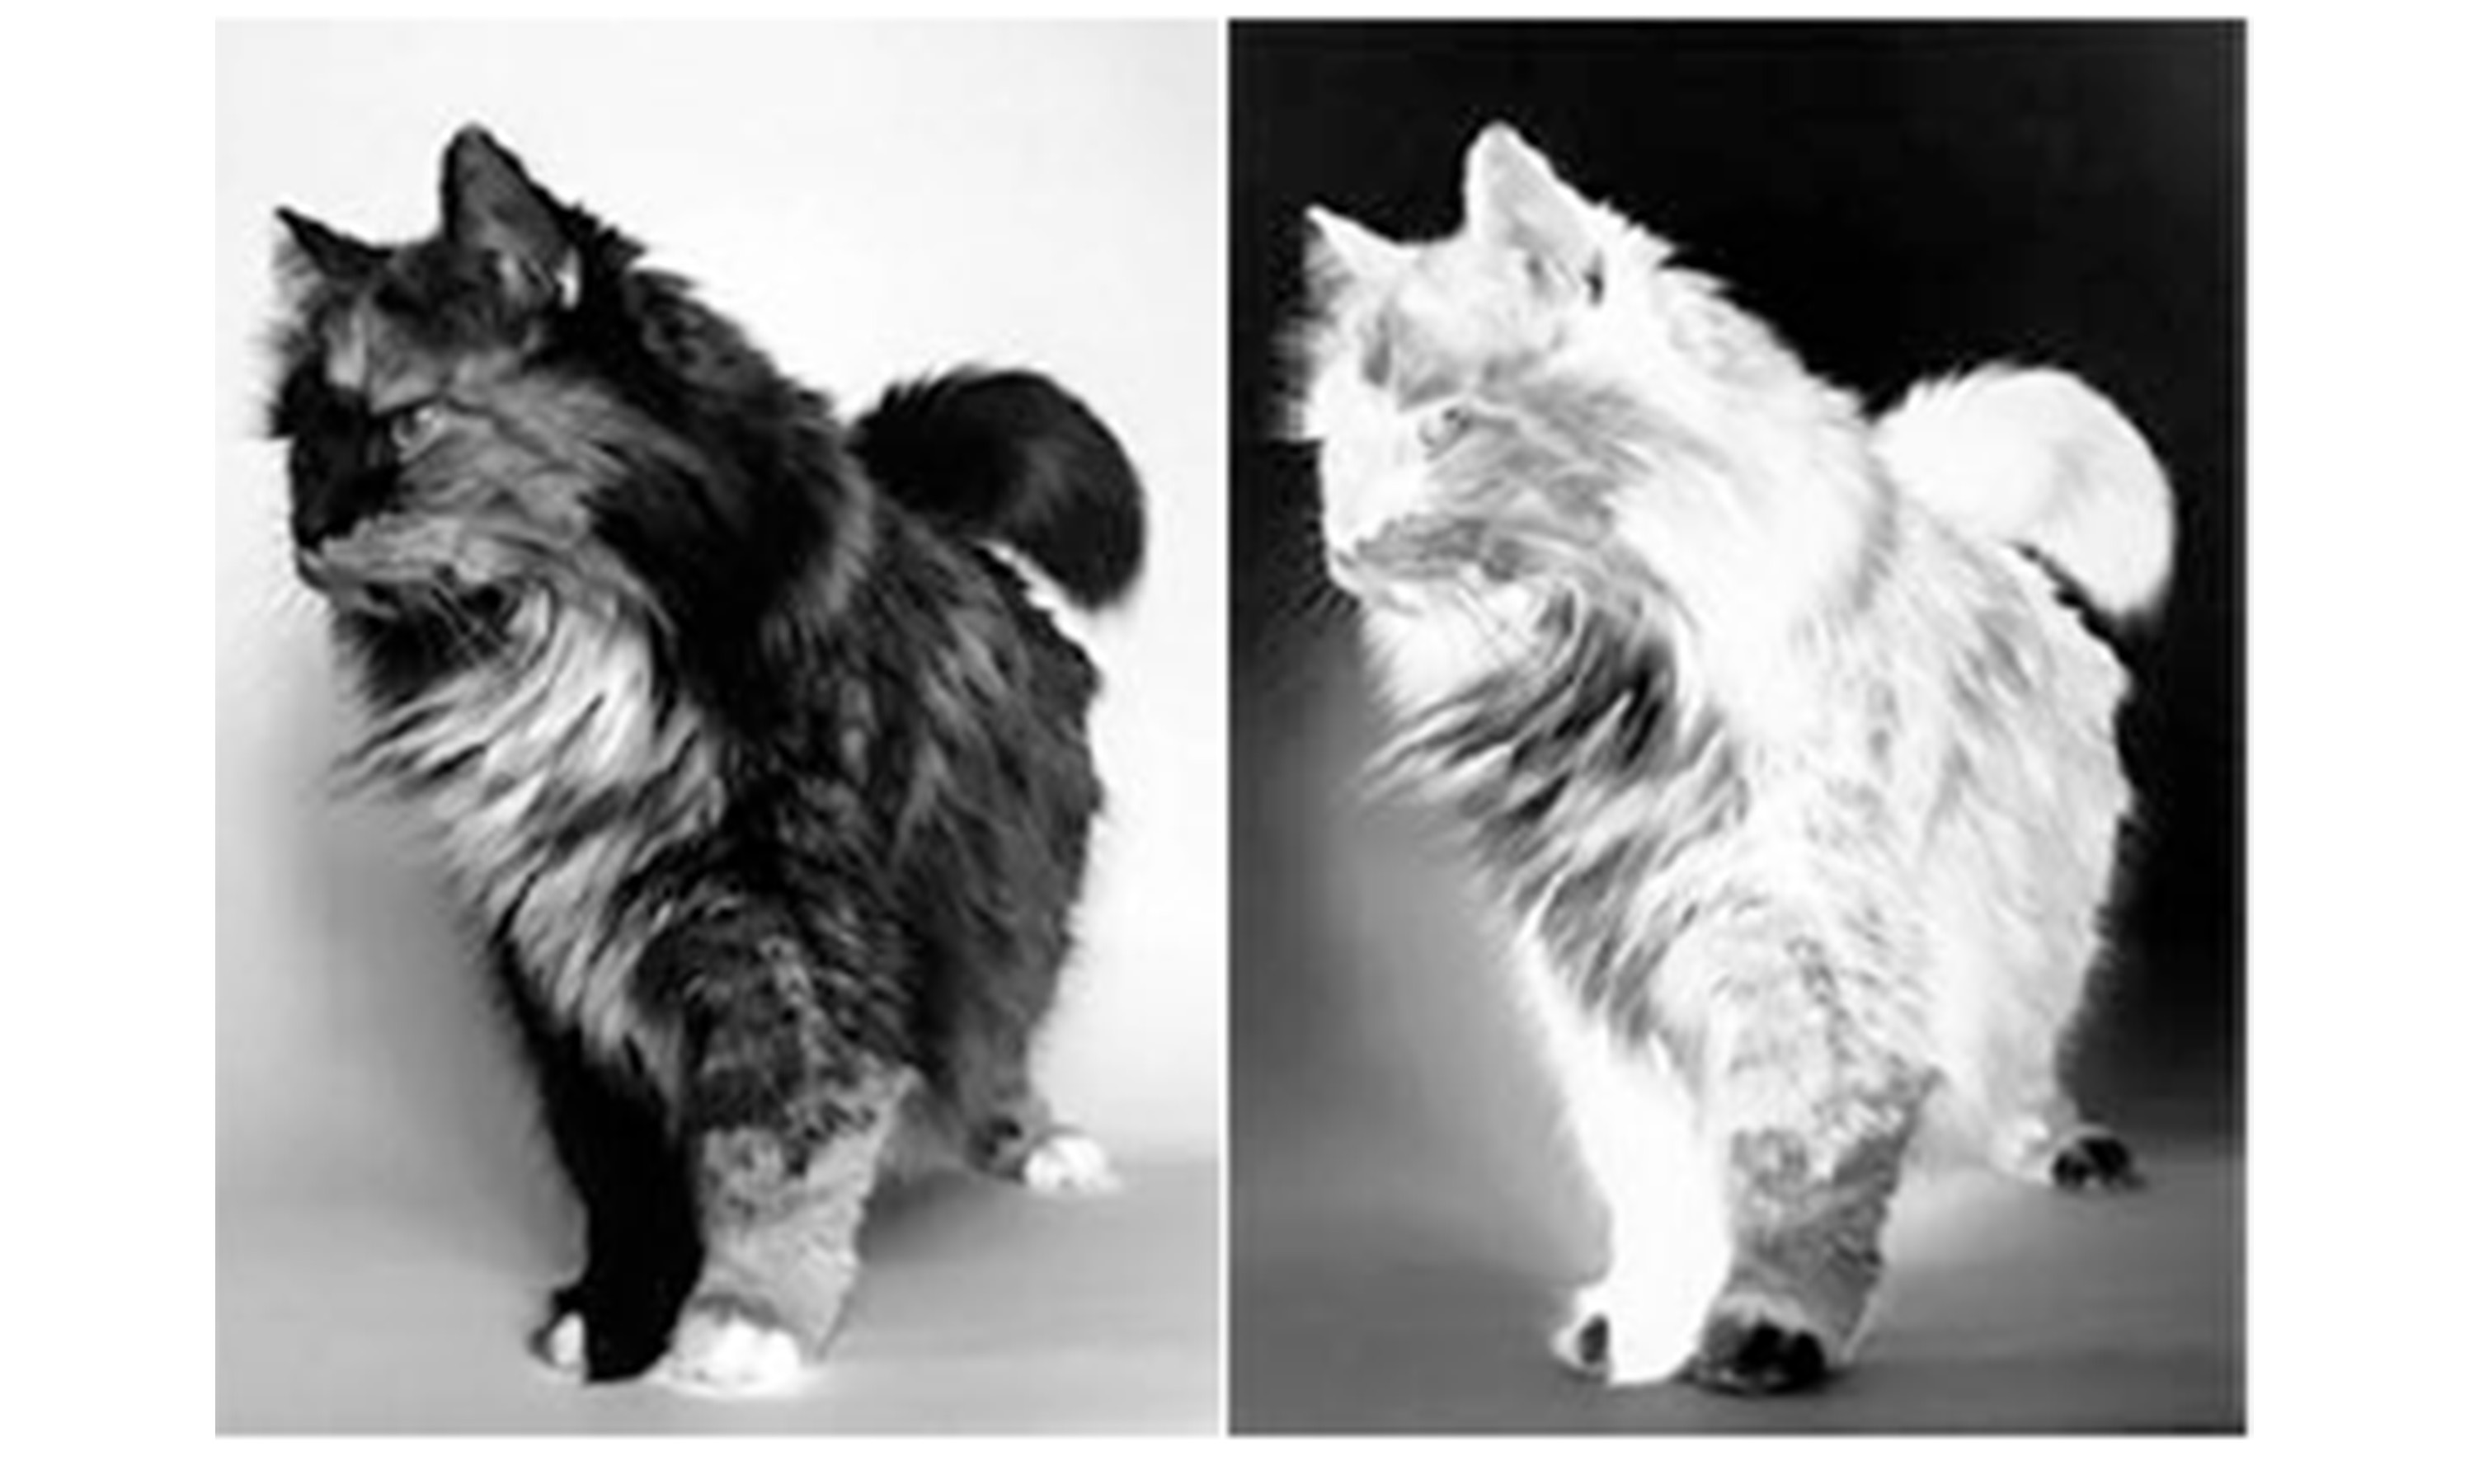 Black and white images of cat named Pickle